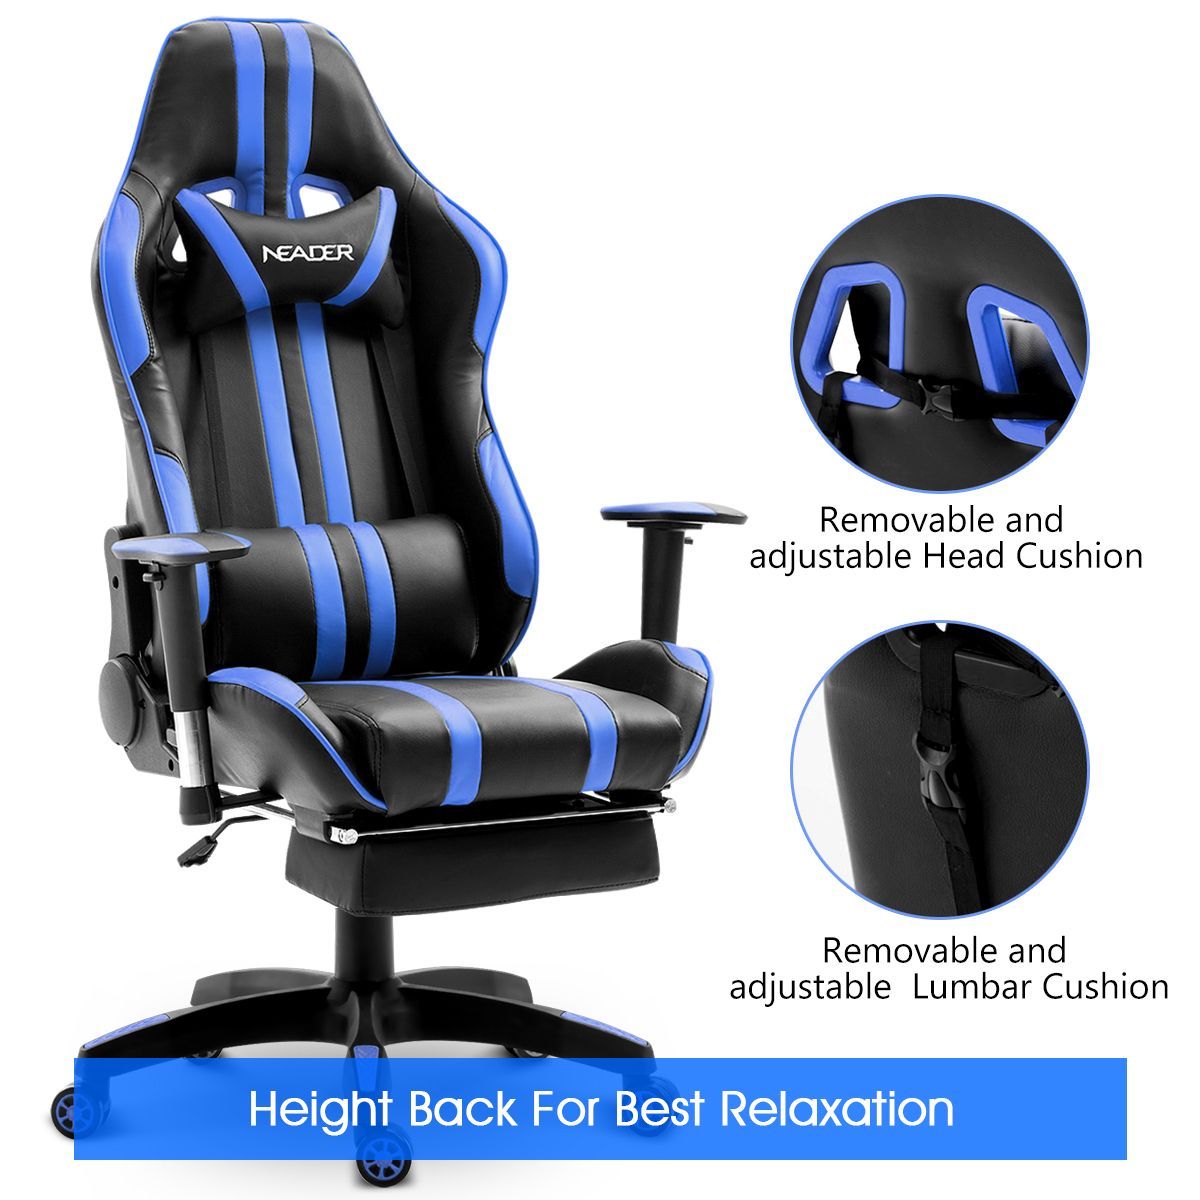 XL Gaming Racing Thick Padded Office Chair W/180 Degree Reclining Max Comfort-Blue/Black